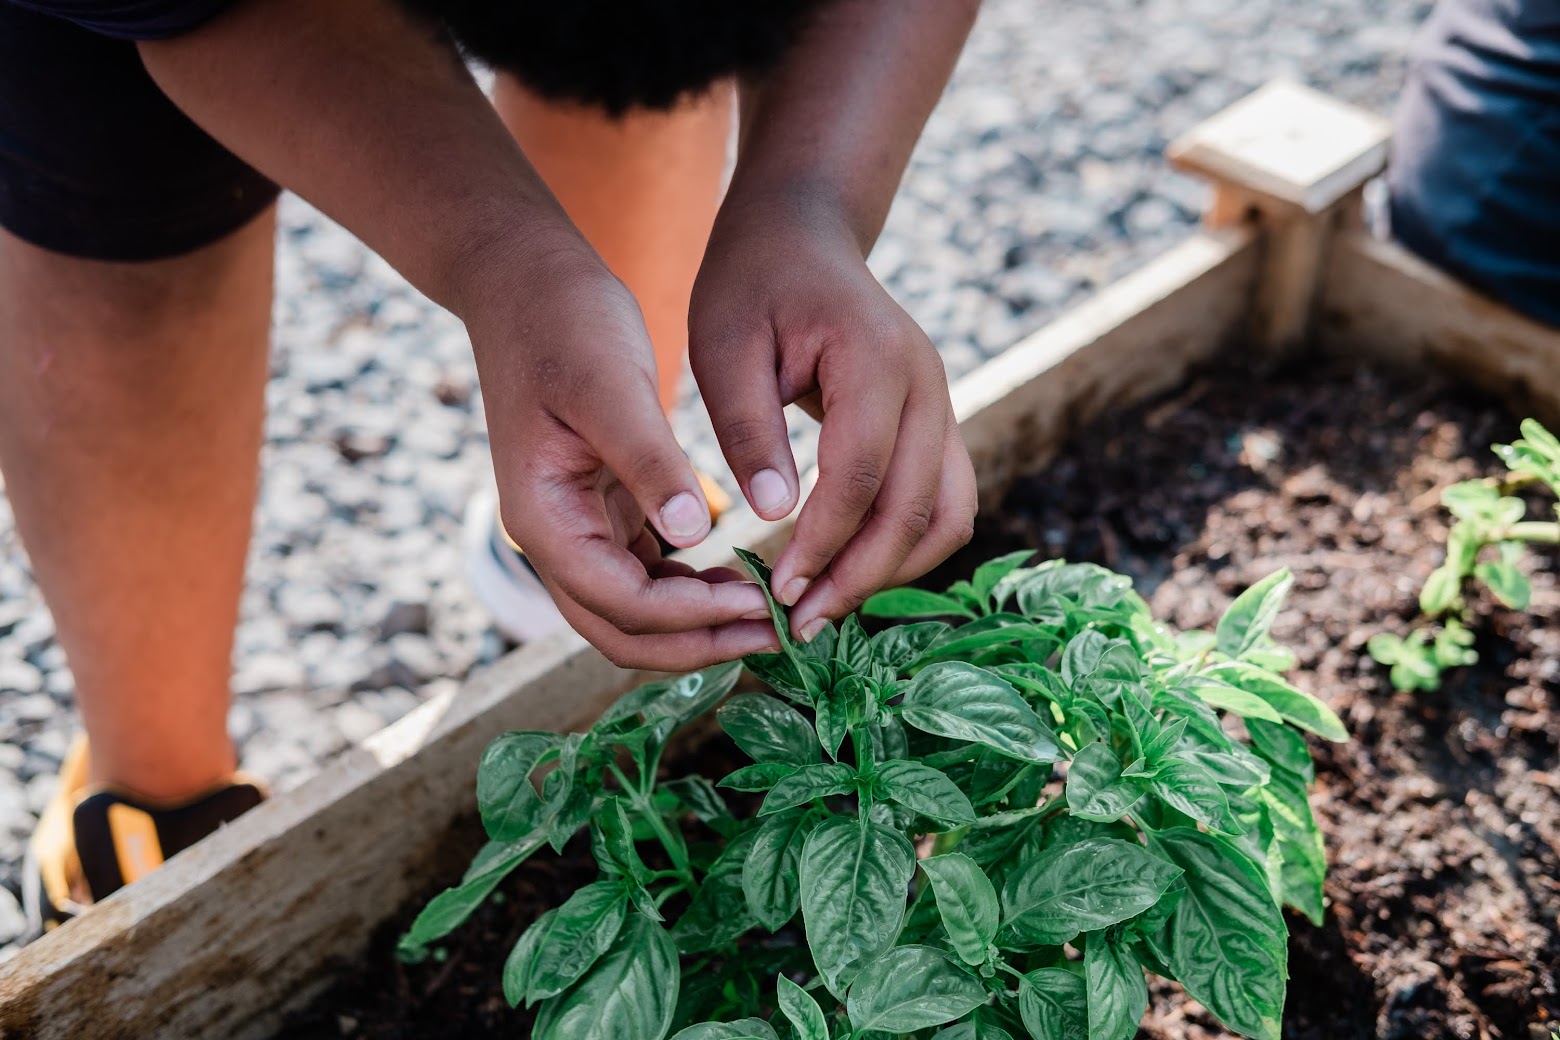 A young student touches basil leaves growing in his school's greenhouse